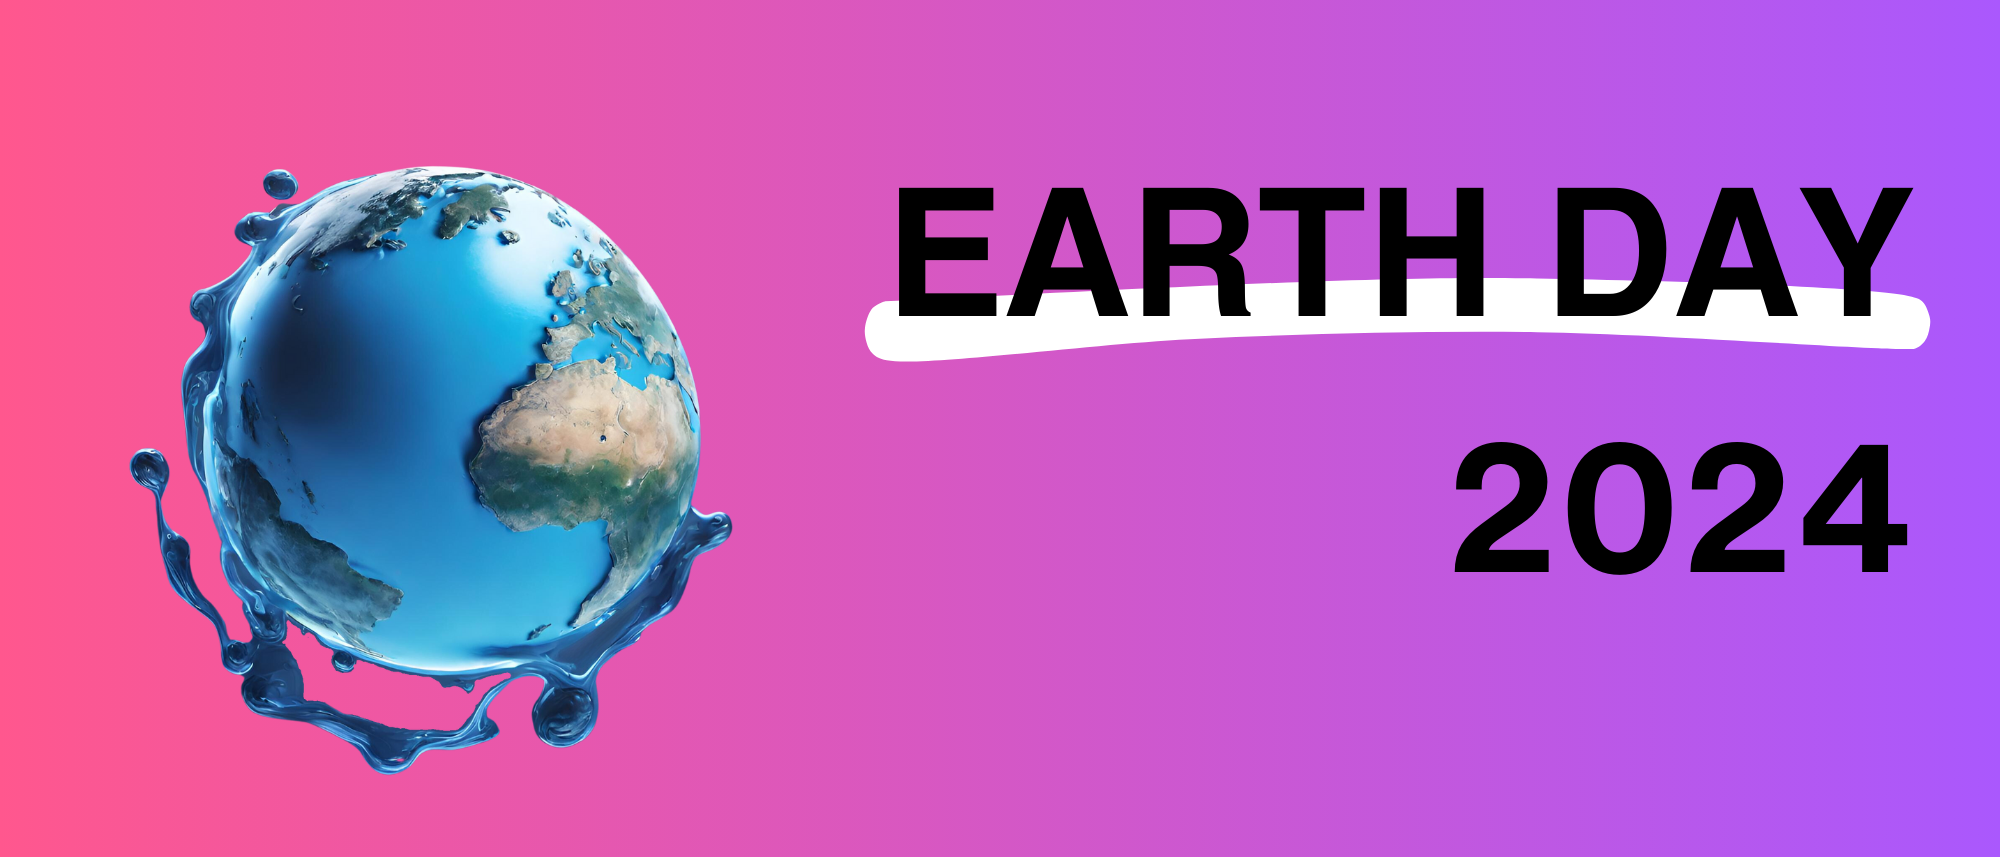 Earth Day is here! What can you do this year?